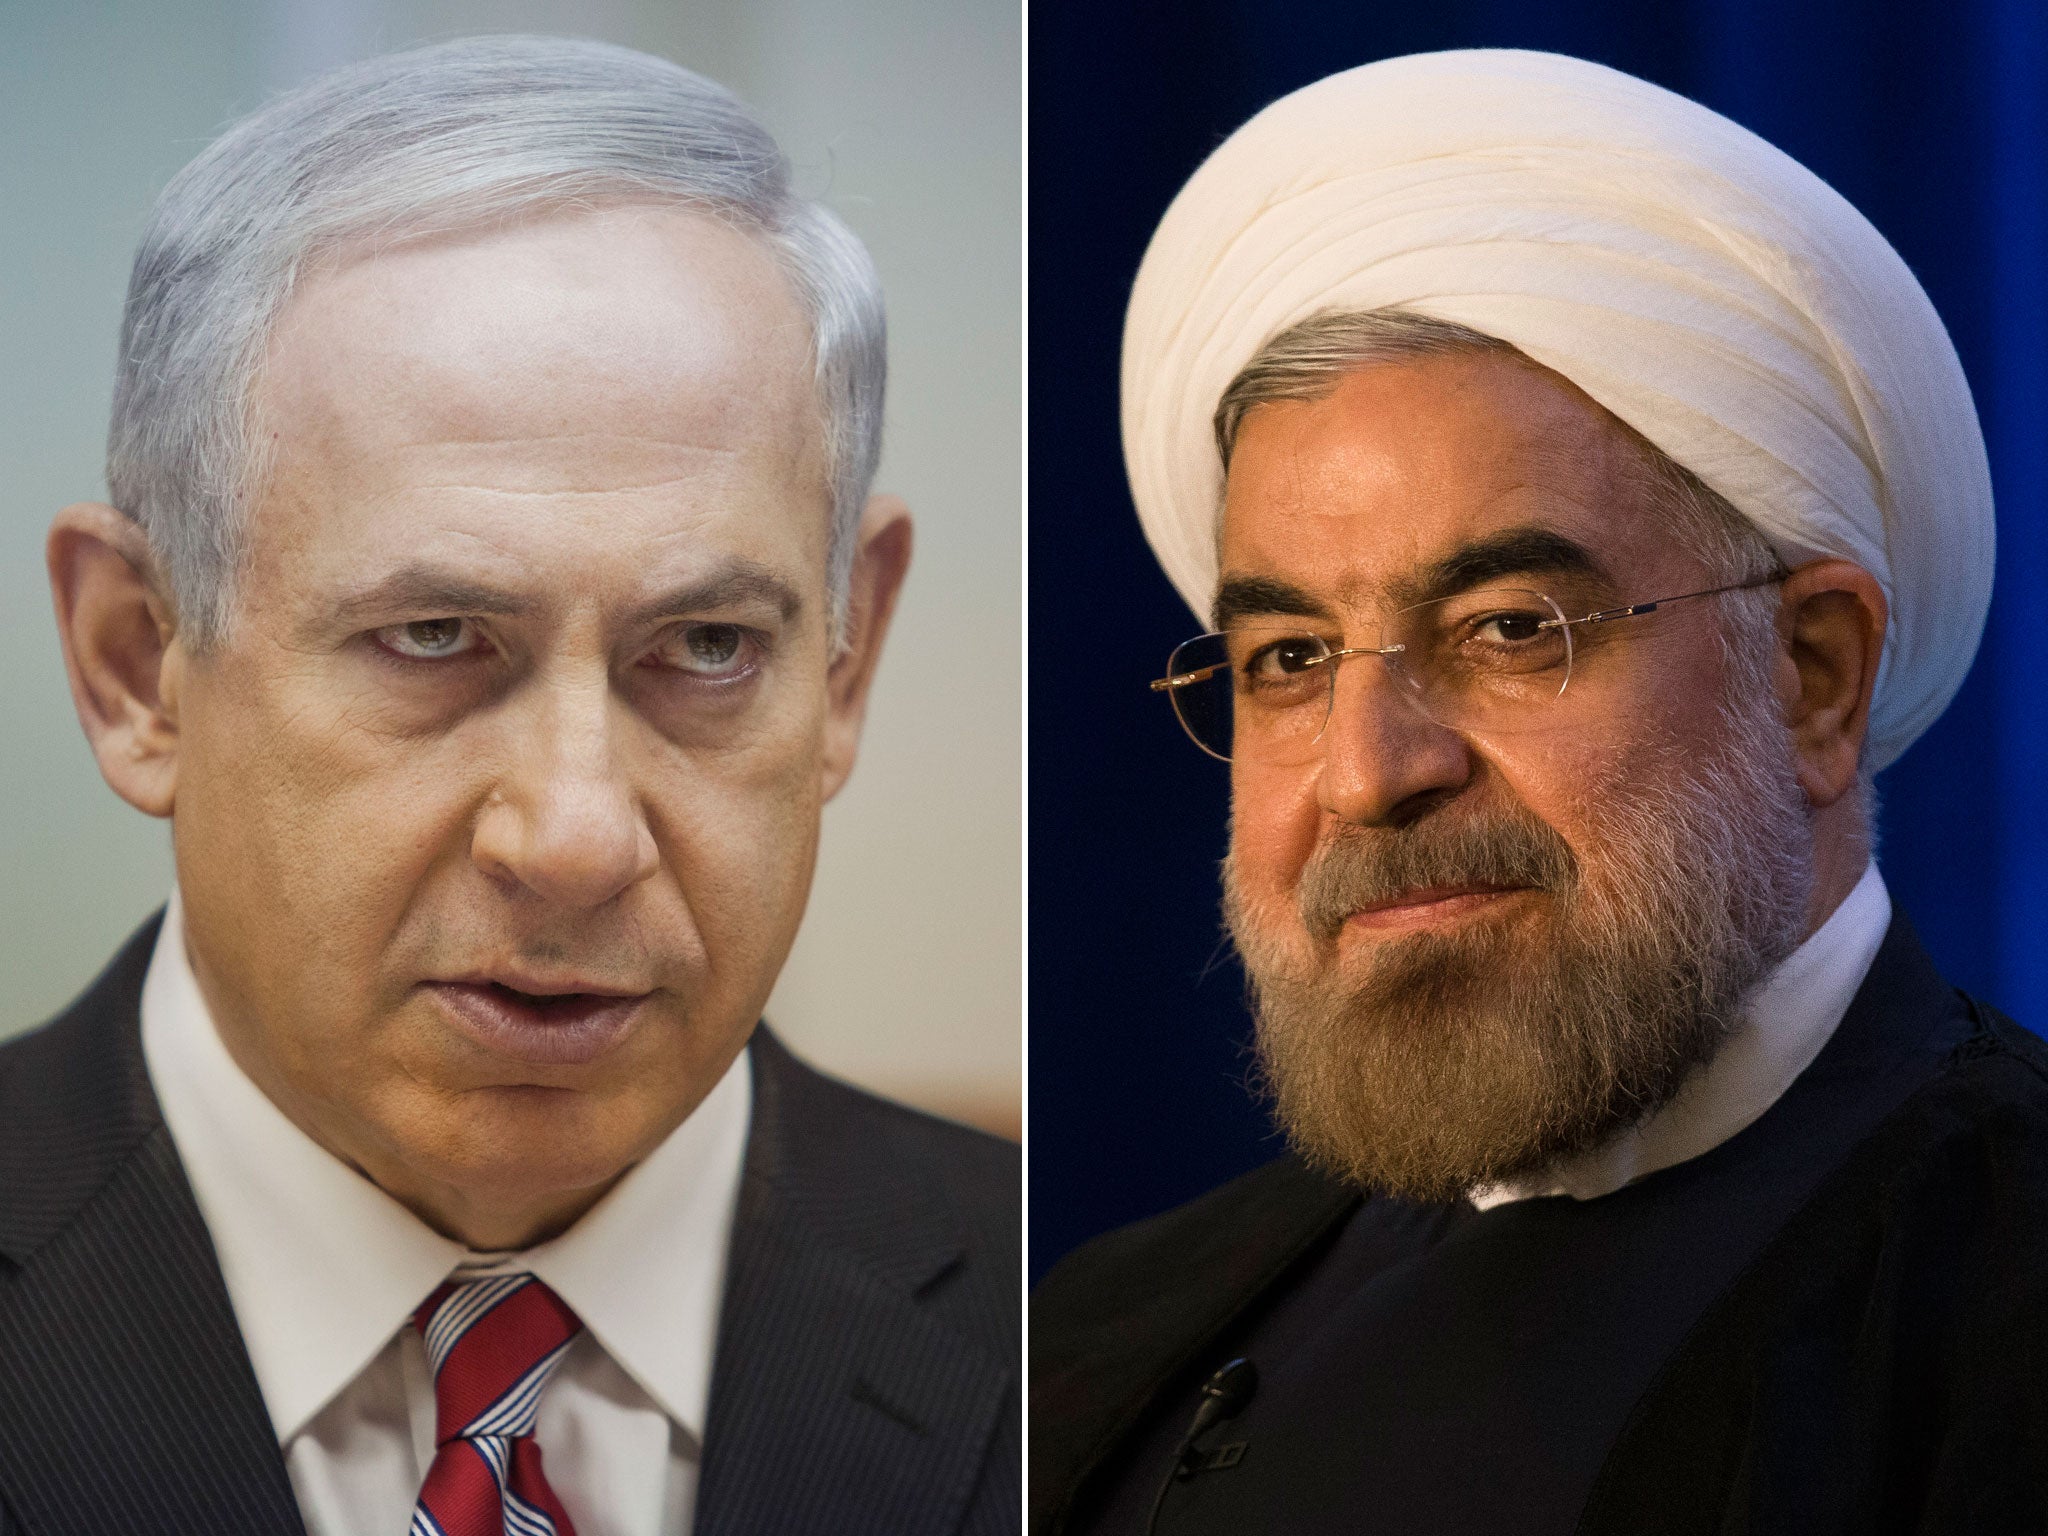 Israeli prime minister Benjamin Netanyahu, left, will try to foil Iran’s moves towards rehabilitation in the international community during a speech at the UN General Assembly aimed at reversing the diplomatic and public opinion gains made by the new Iran